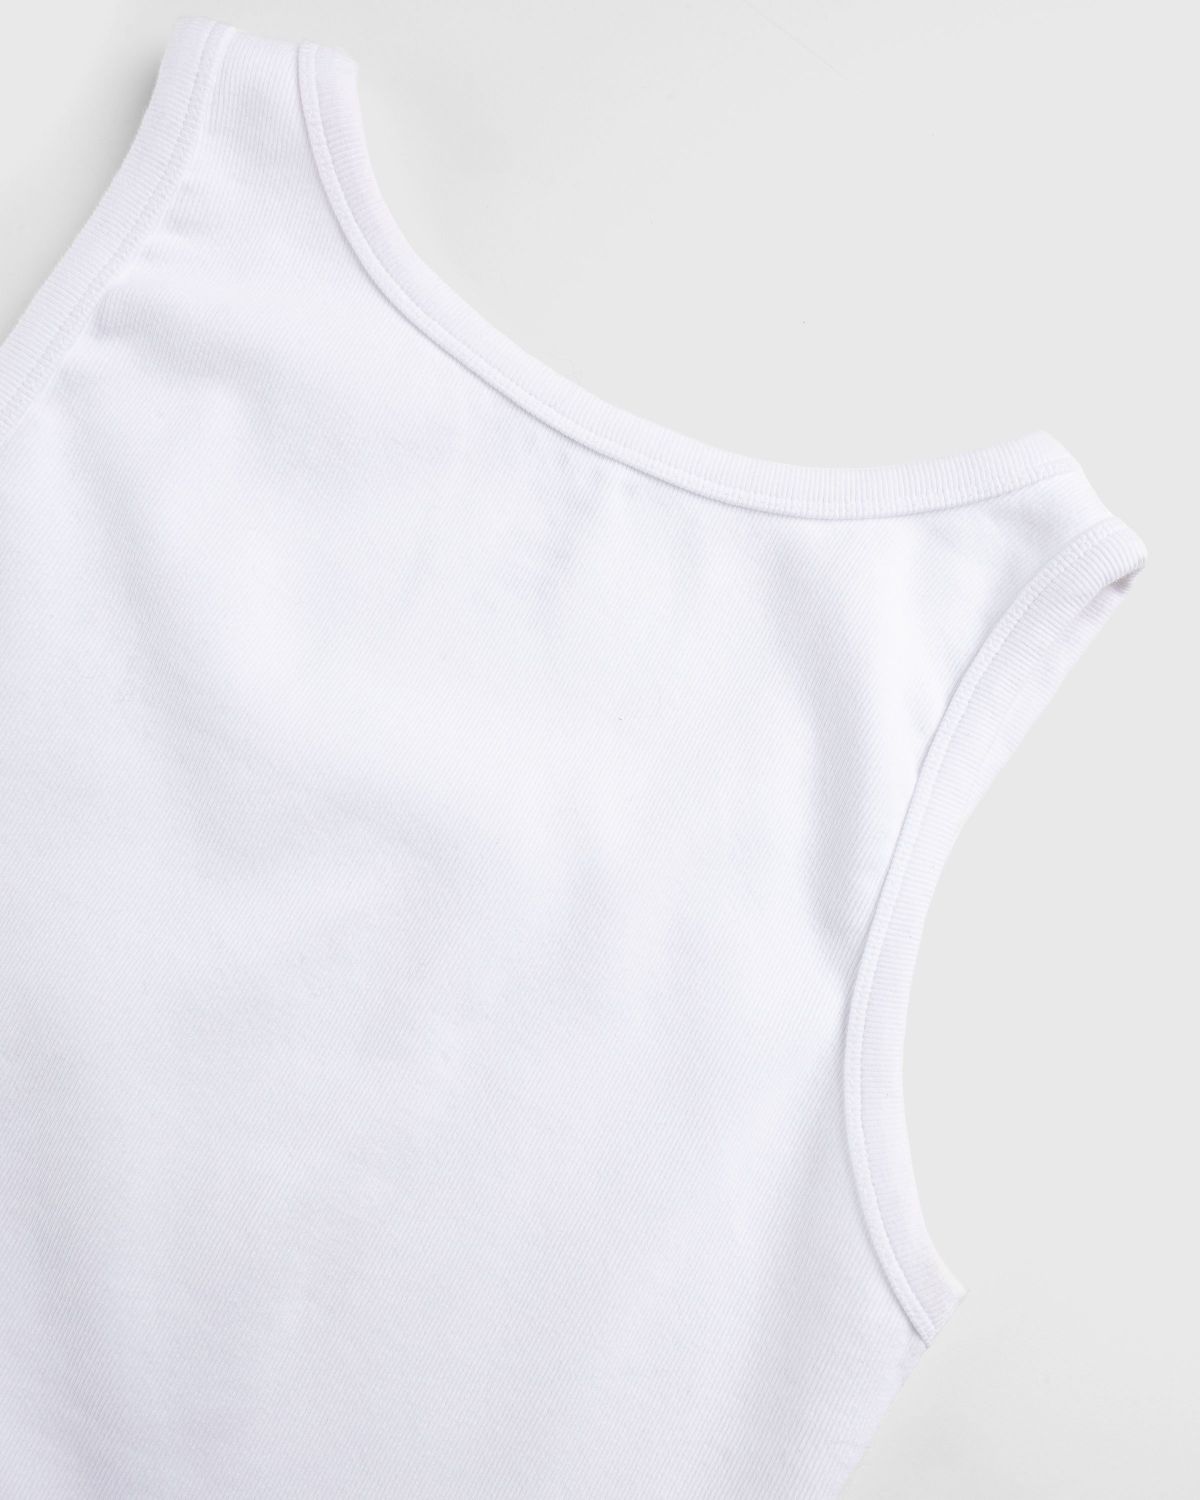 Highsnobiety HS05 – 3 Pack Heavyweight Tank Top White - Tops - White - Image 7